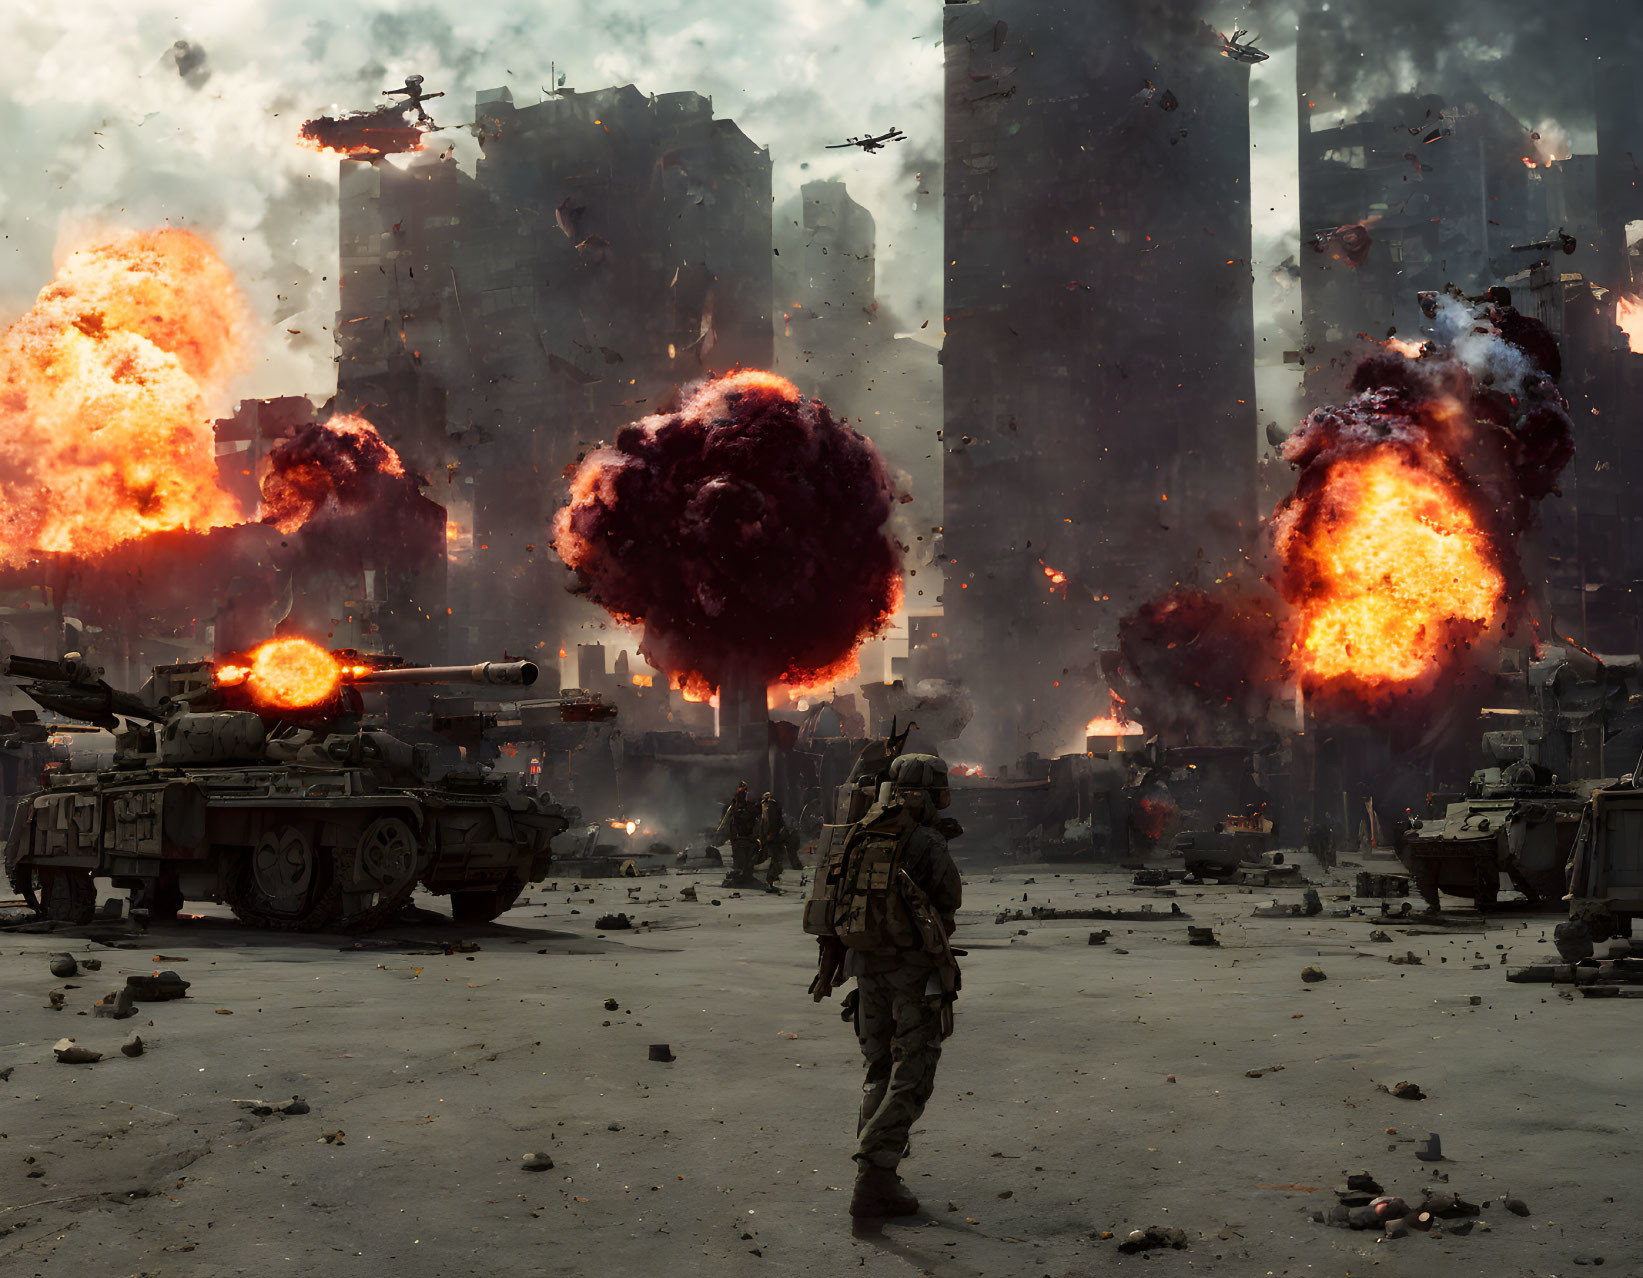 Warzone scene with exploding fireballs, tanks, and helicopters in devastated urban landscape